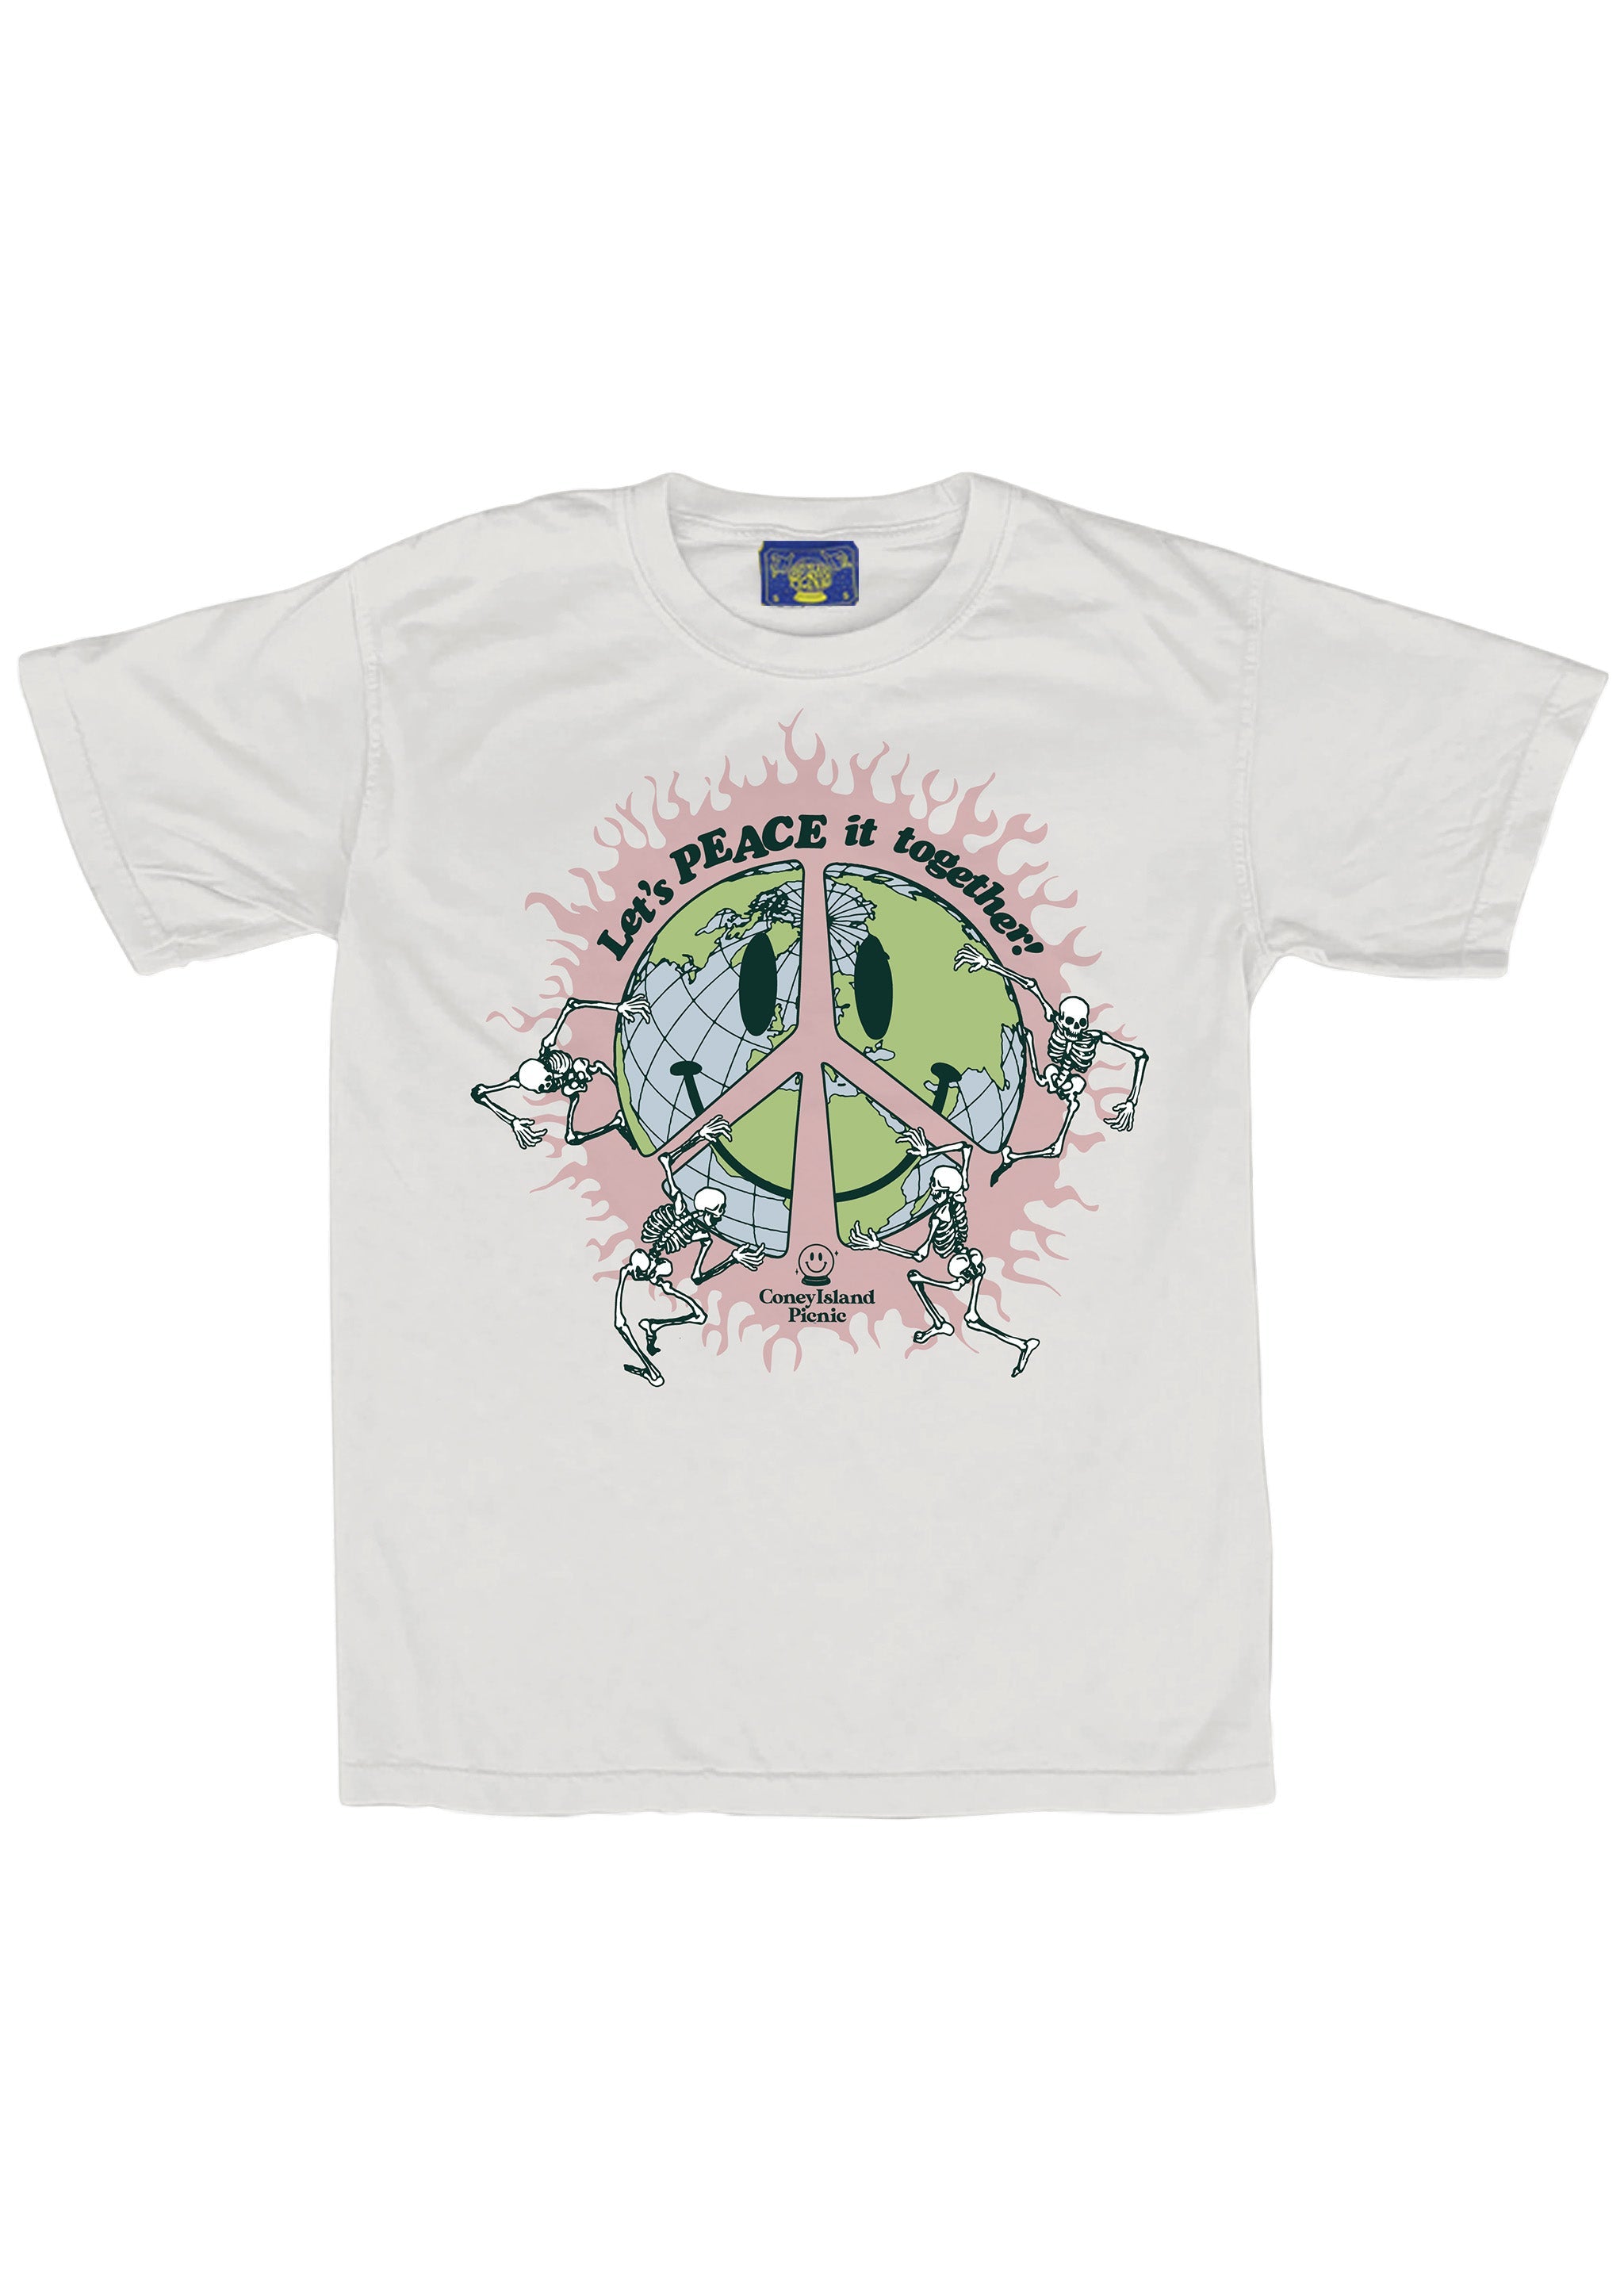 Let's Peace it Together Graphic Short Sleeve Tee